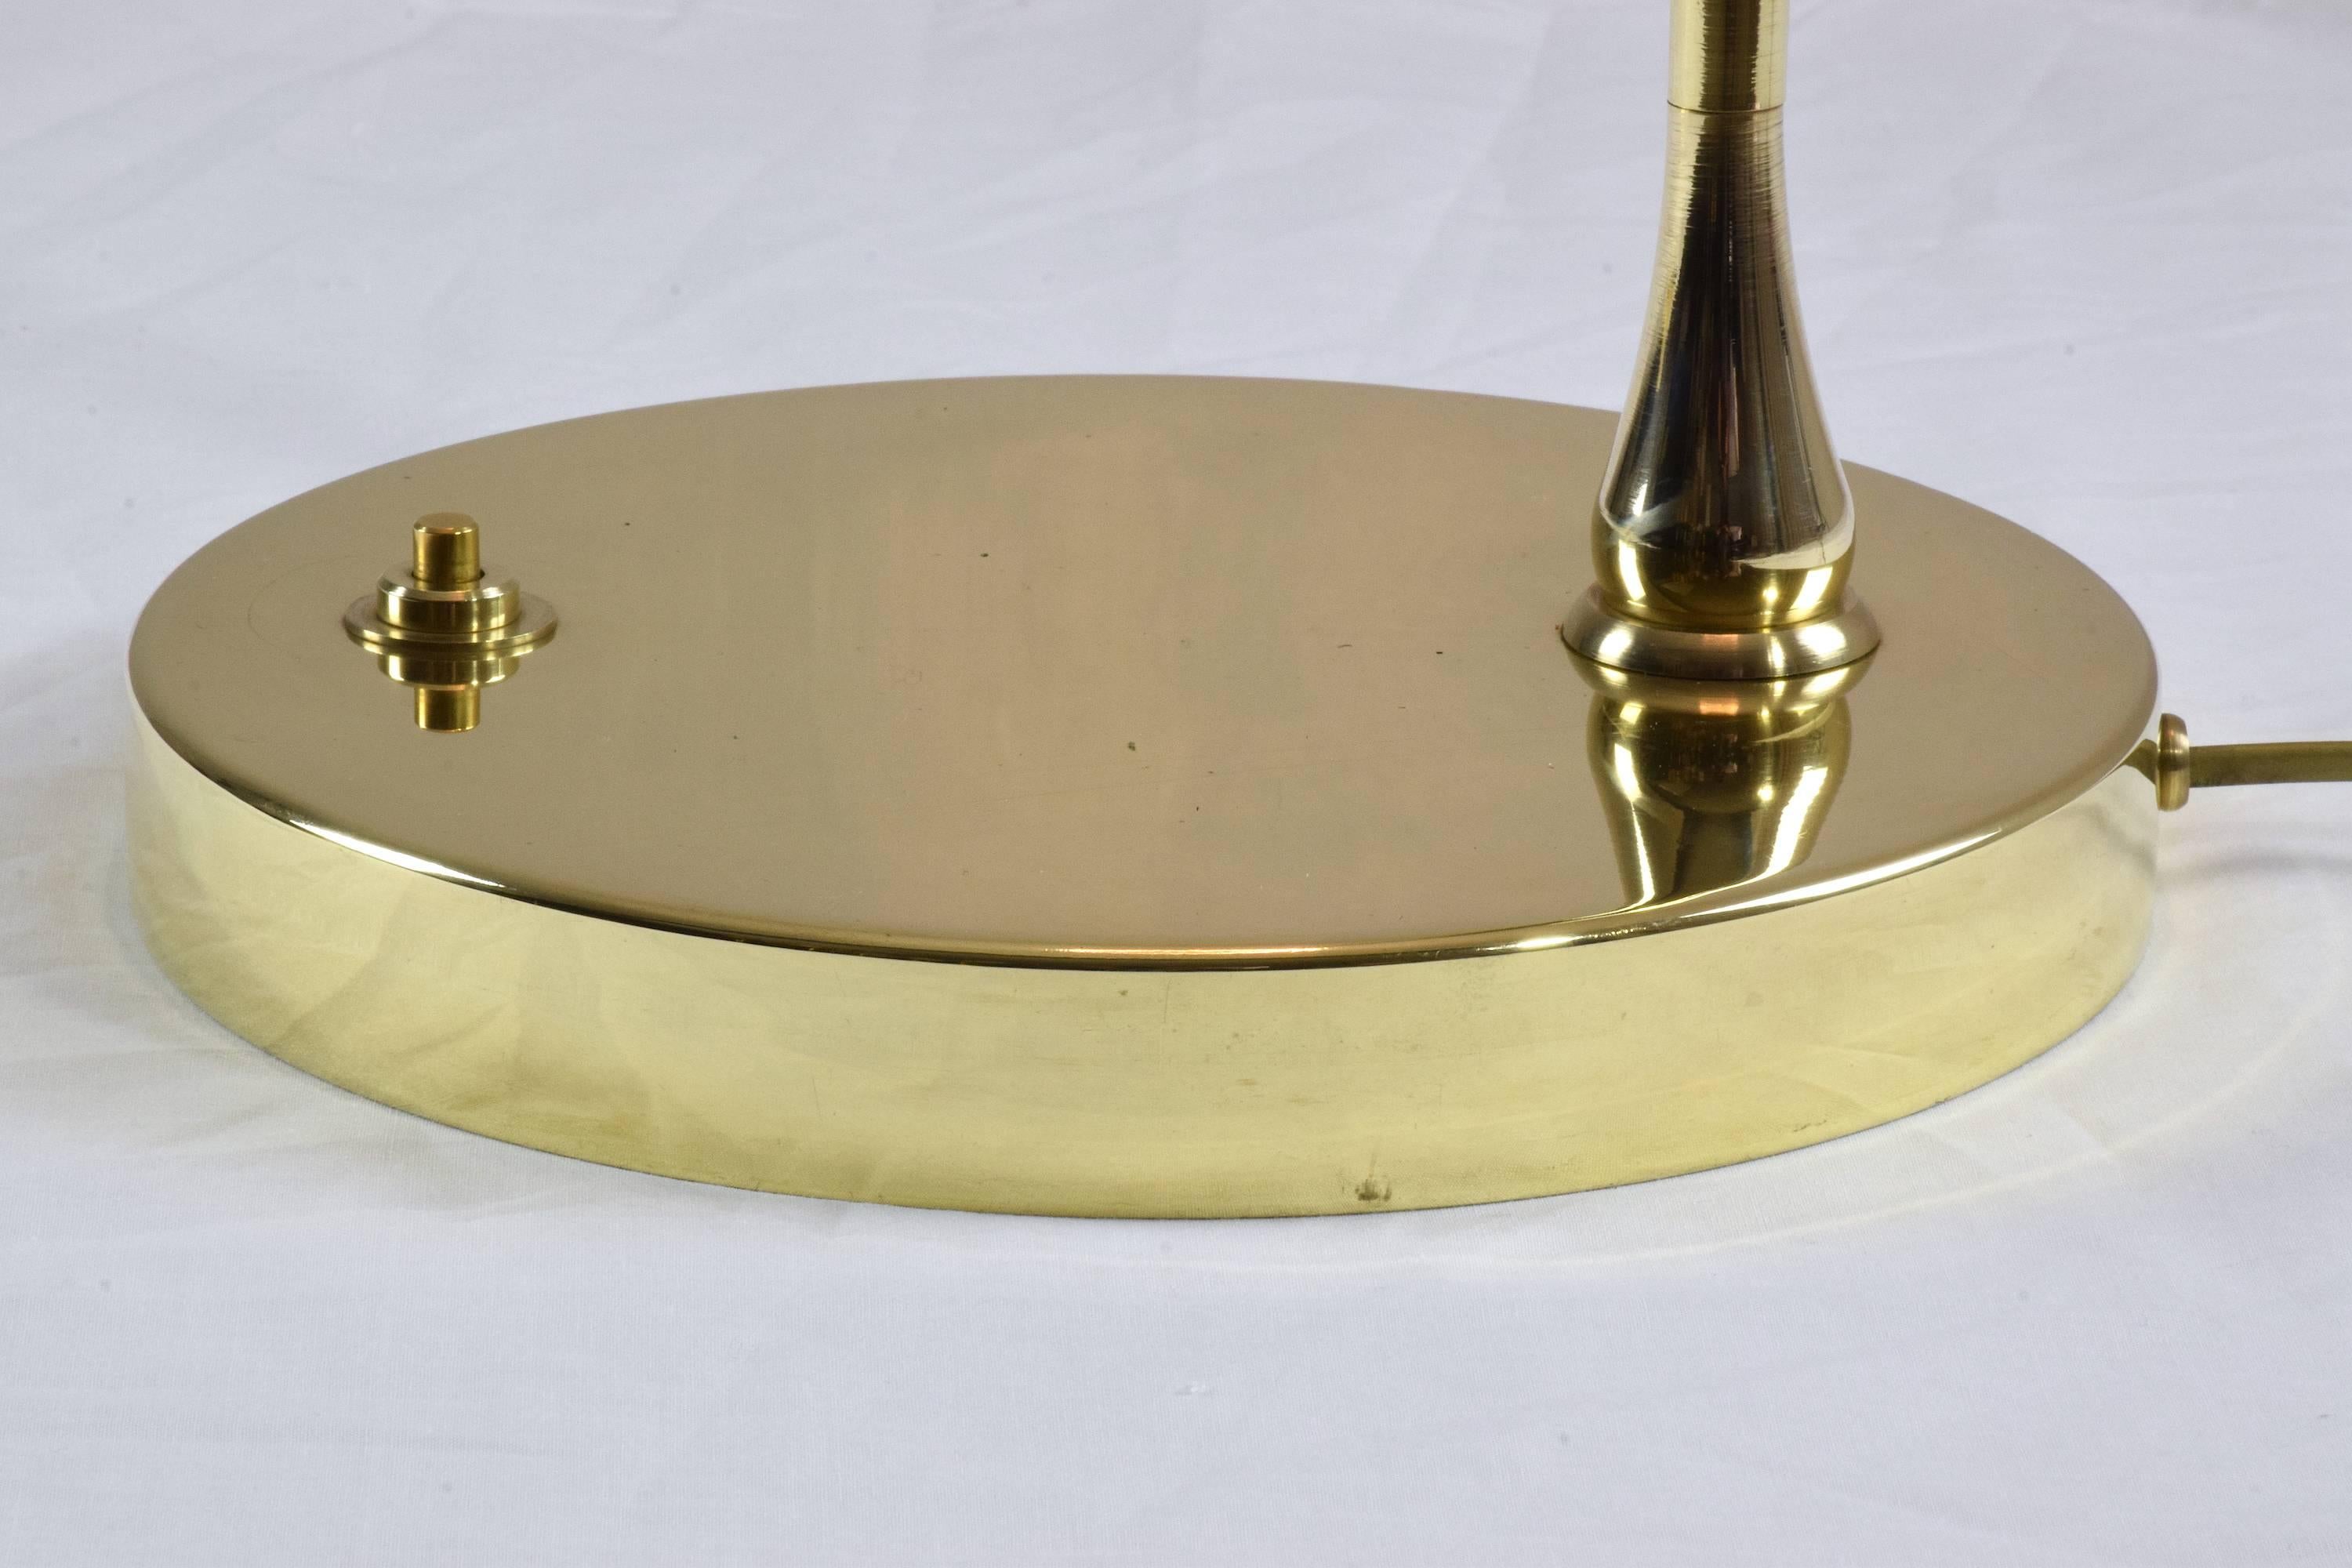 French Equilibrium-I Contemporary Handcrafted Adjustable Brass Floor Lamp